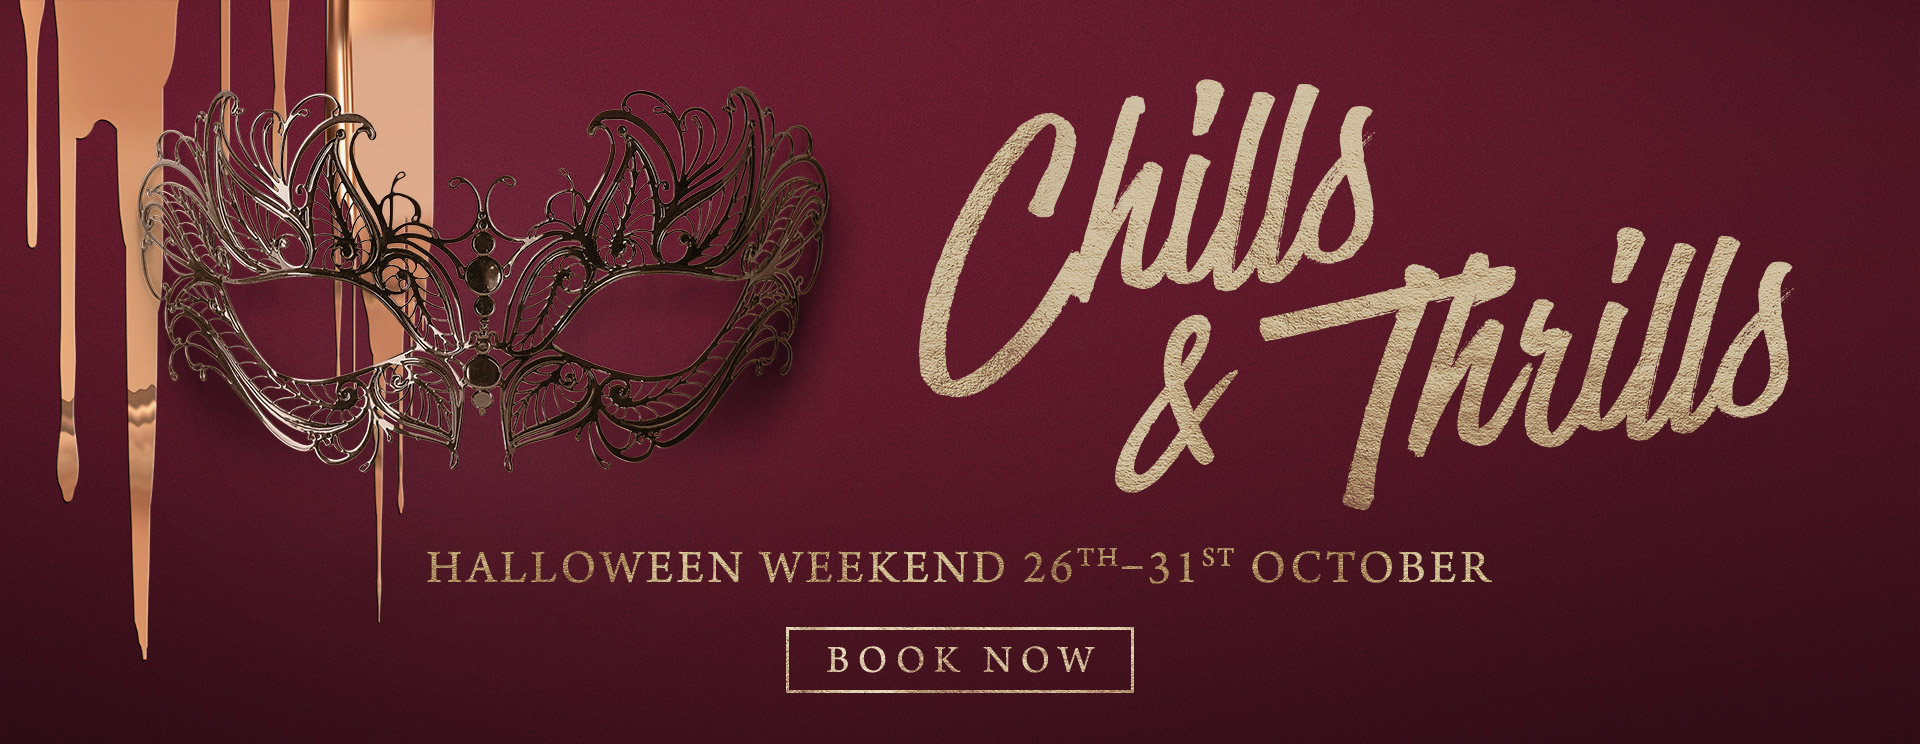 Chills & Thrills this Halloween at The Black Horse